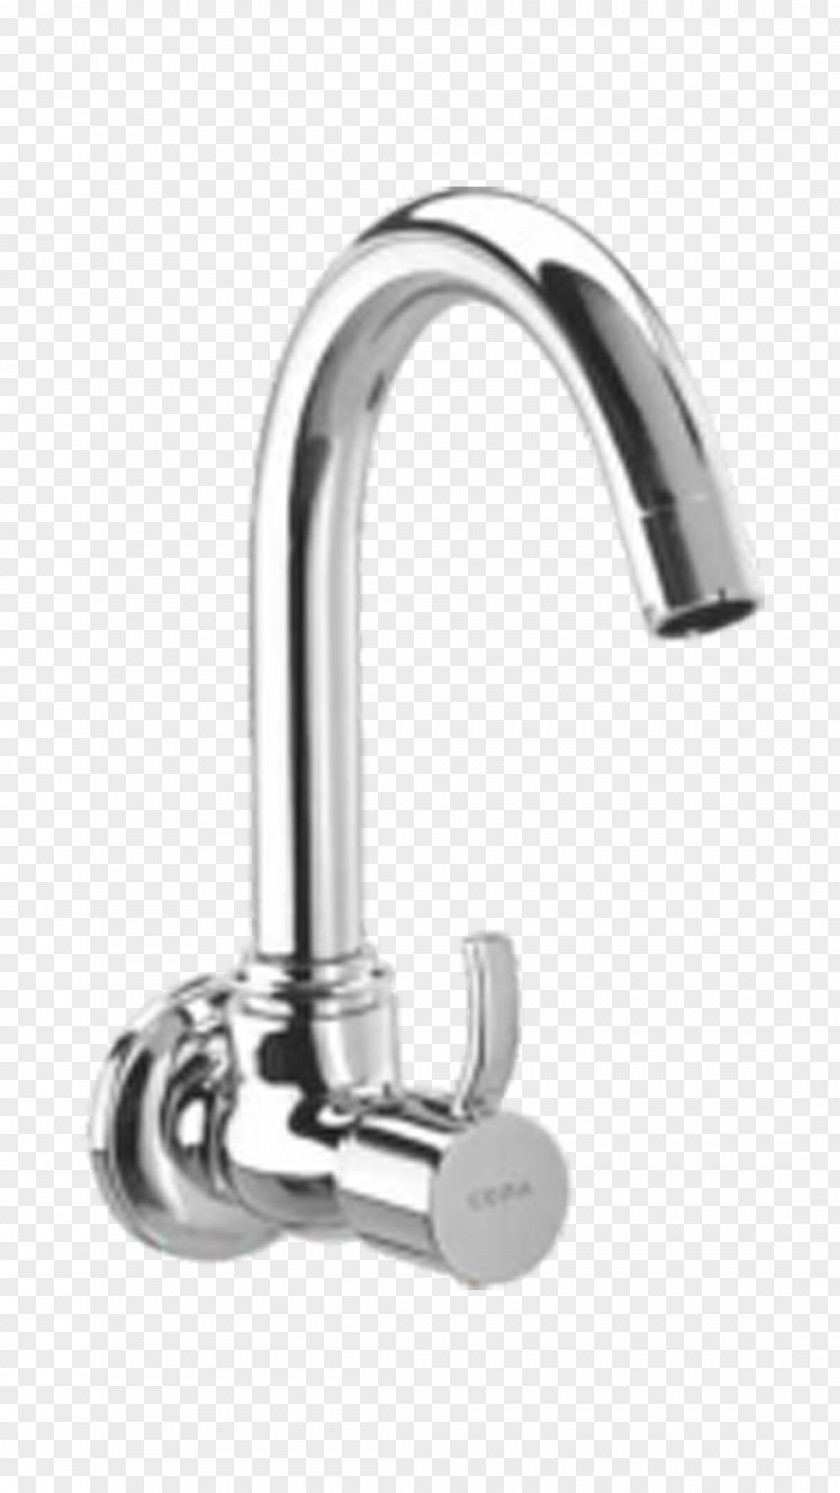 Sink Tap Water Piping And Plumbing Fitting Brass PNG